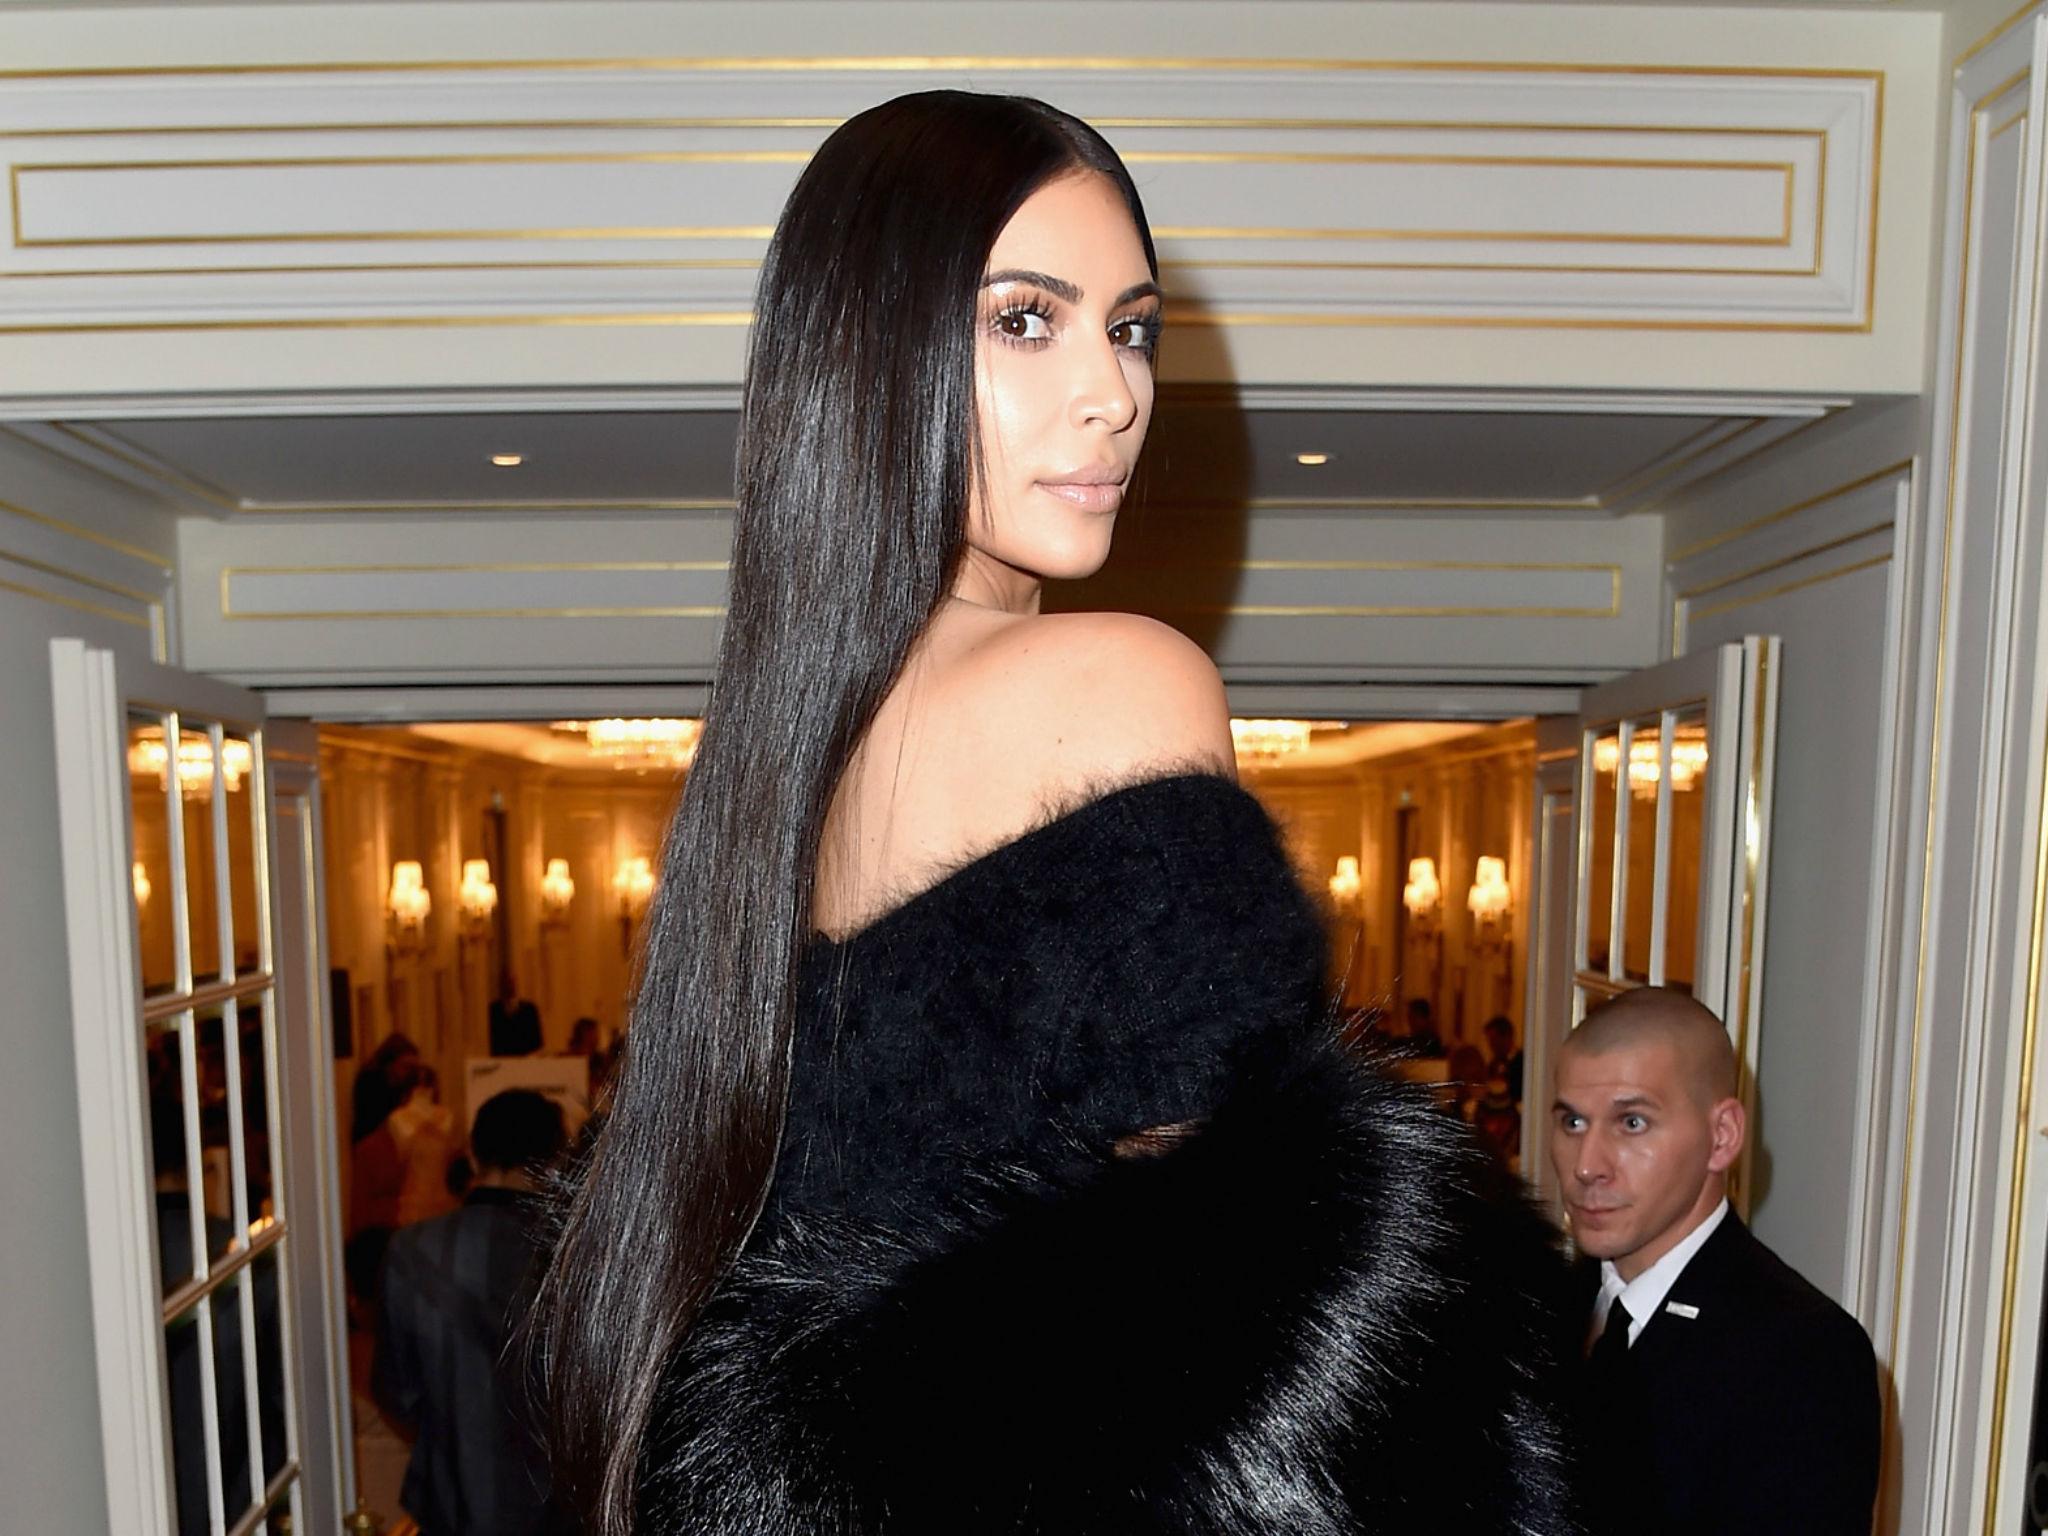 The people suspected of robbing Kim Kardashian have been arrested